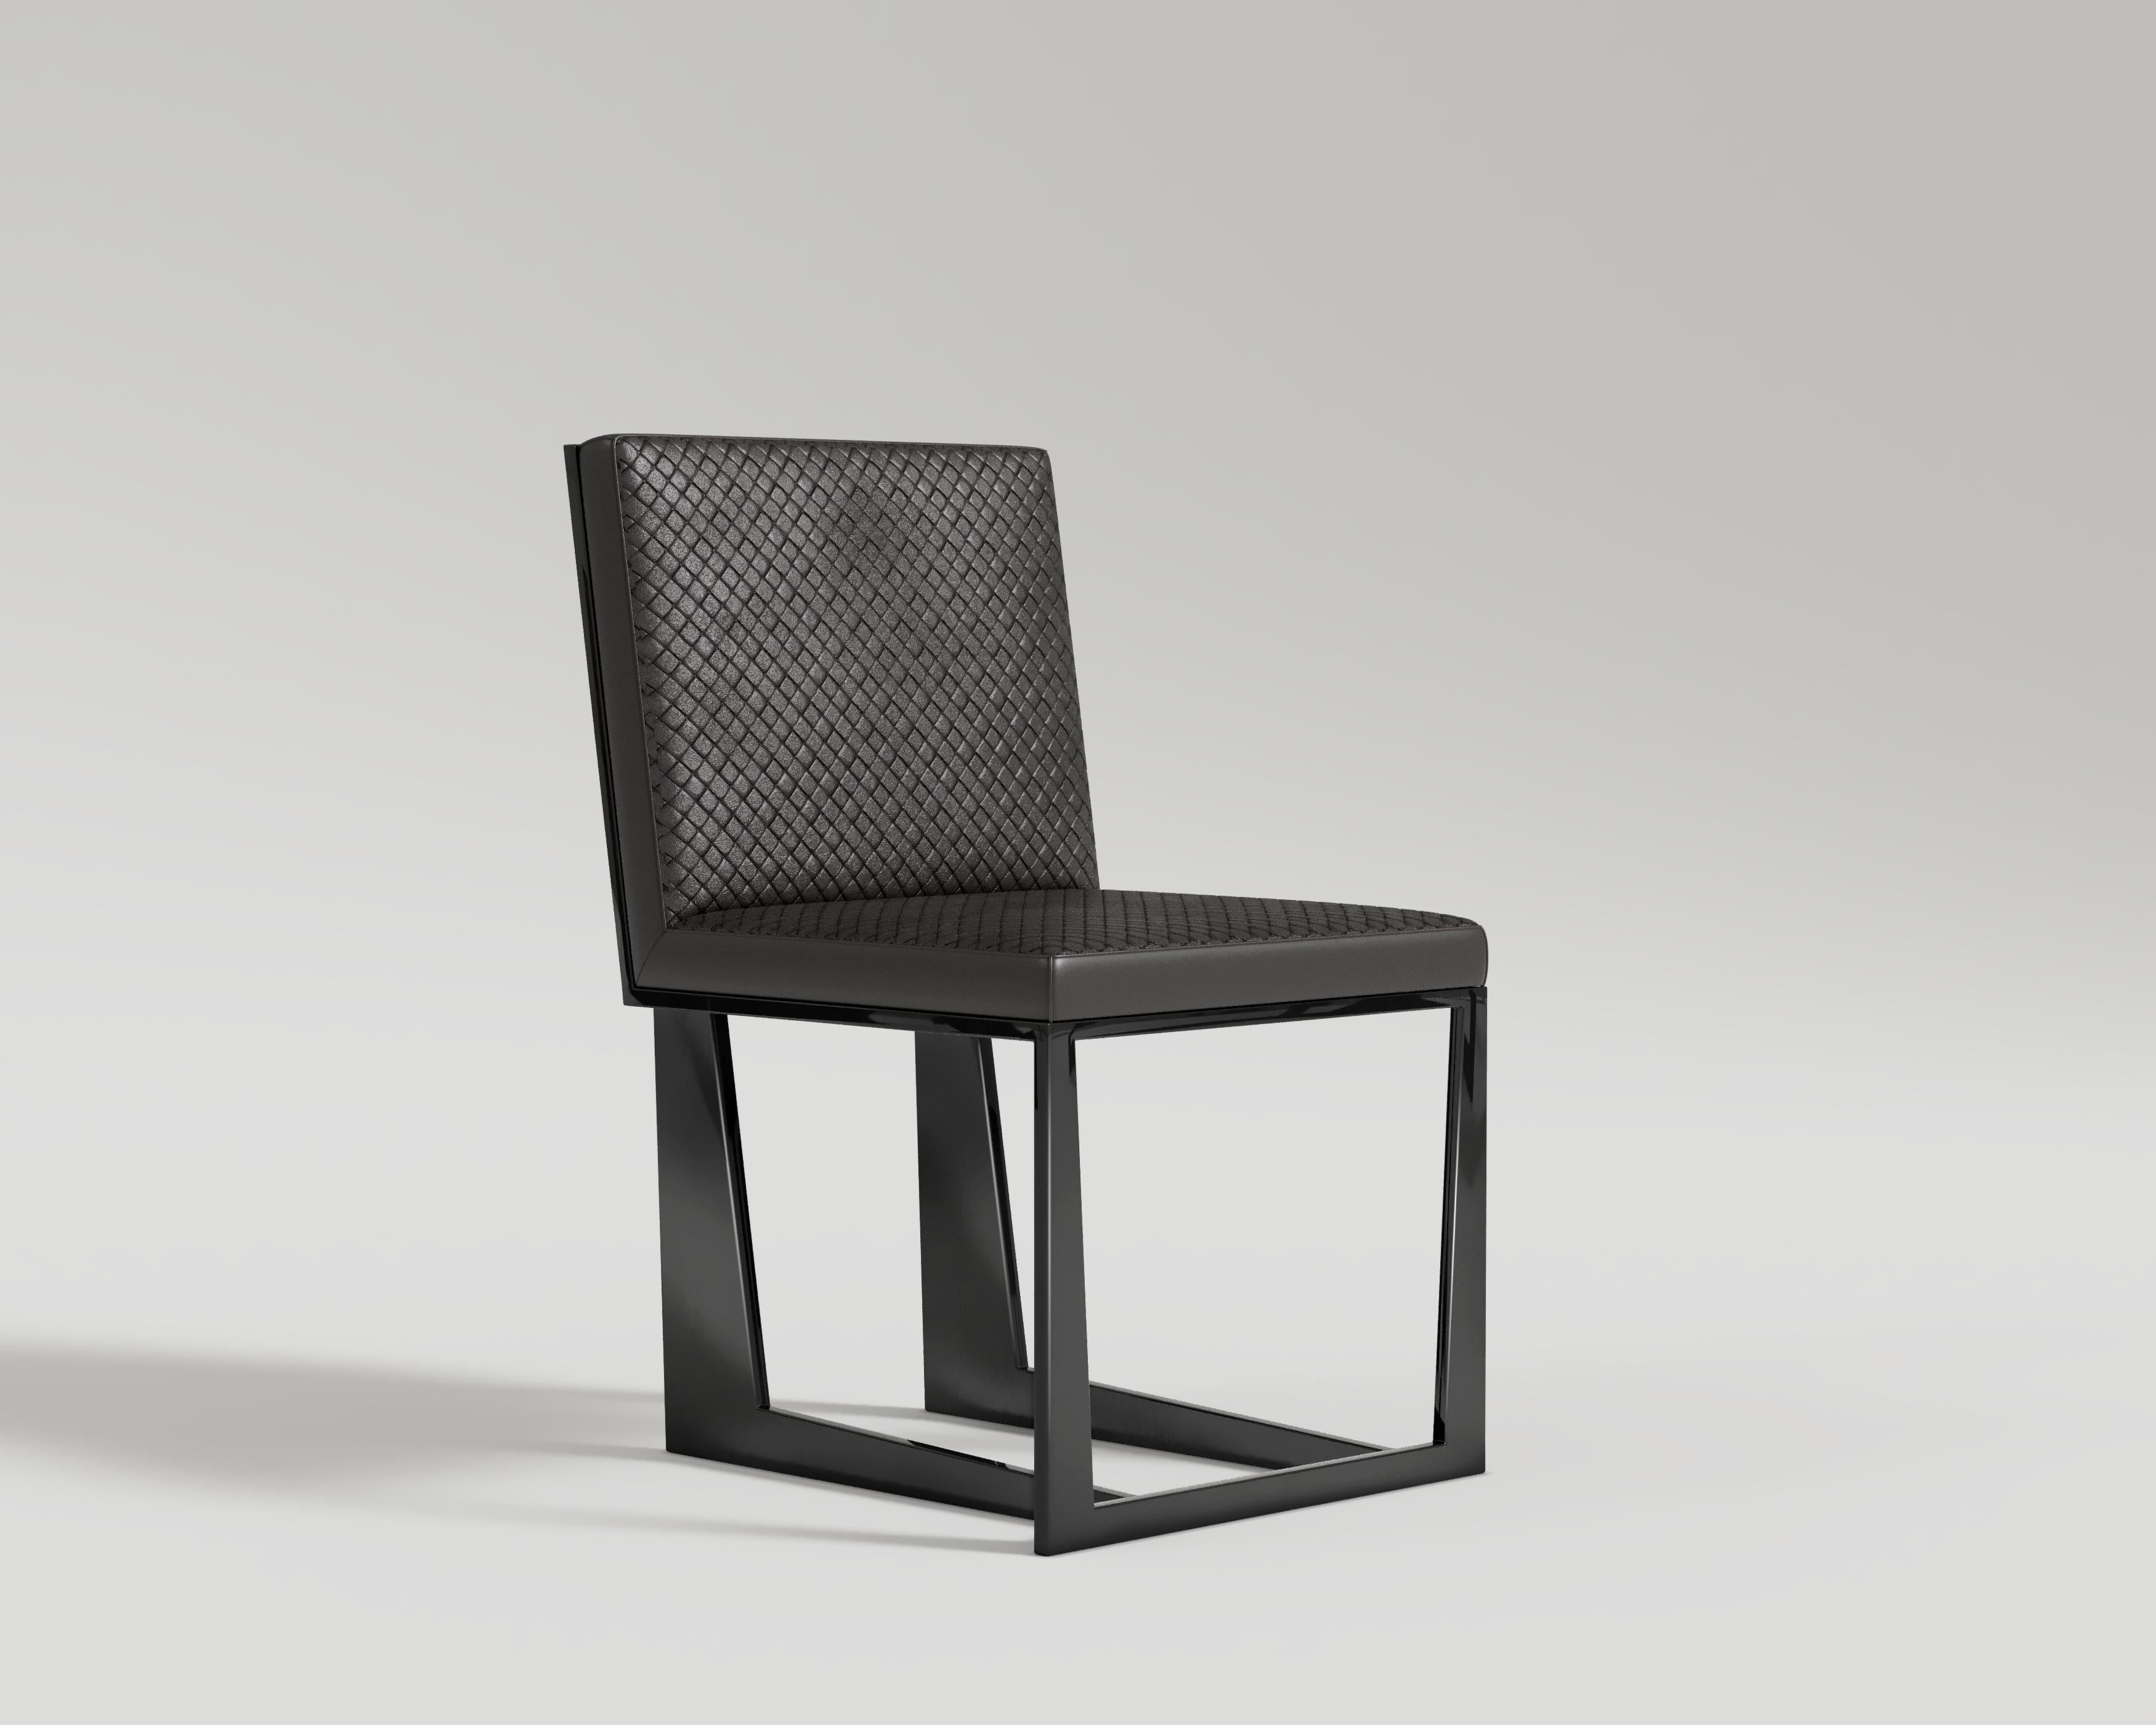 Affilato Chair
Welcome to Palena Furniture, where the Affilato Dining Chair redefines the art of dining with two exquisite finishing options. A combination of durability and design speaks to the soul of your dining space: black lacquered metal